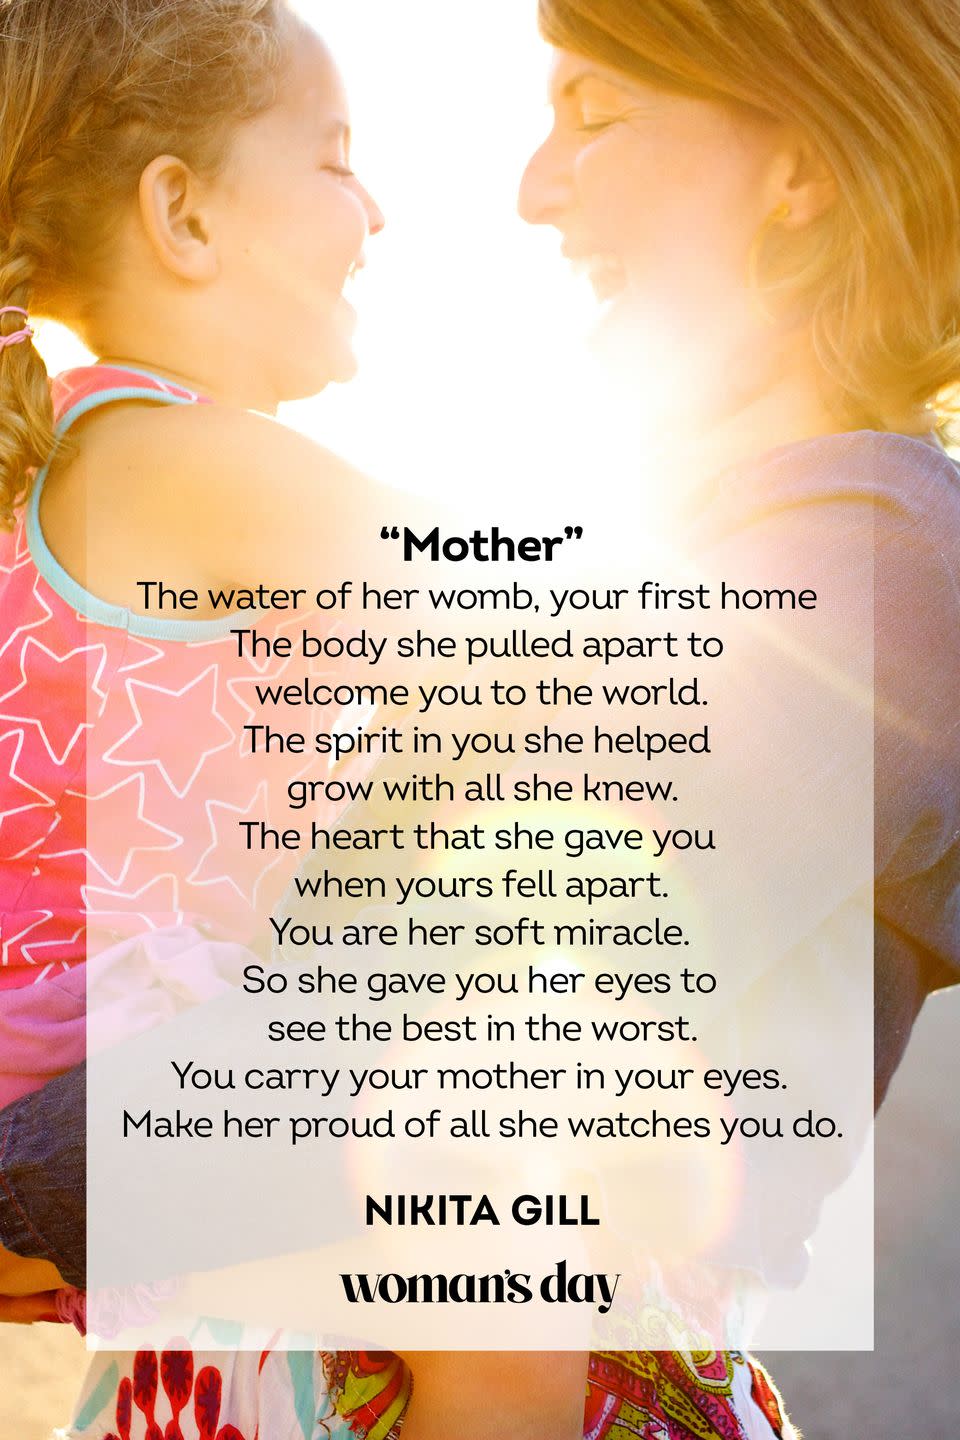 <p>The water of her womb, your first home<br>The body she pulled apart to welcome you to the world.<br>The spirit in you she helped grow with all she knew.<br>The heart that she gave you when yours fell apart.<br>You are her soft miracle.<br>So she gave you her eyes to see the best in the worst.<br>You carry your mother in your eyes.<br>Make her proud of all she watches you do.</p><p>— Nikita Gill</p>